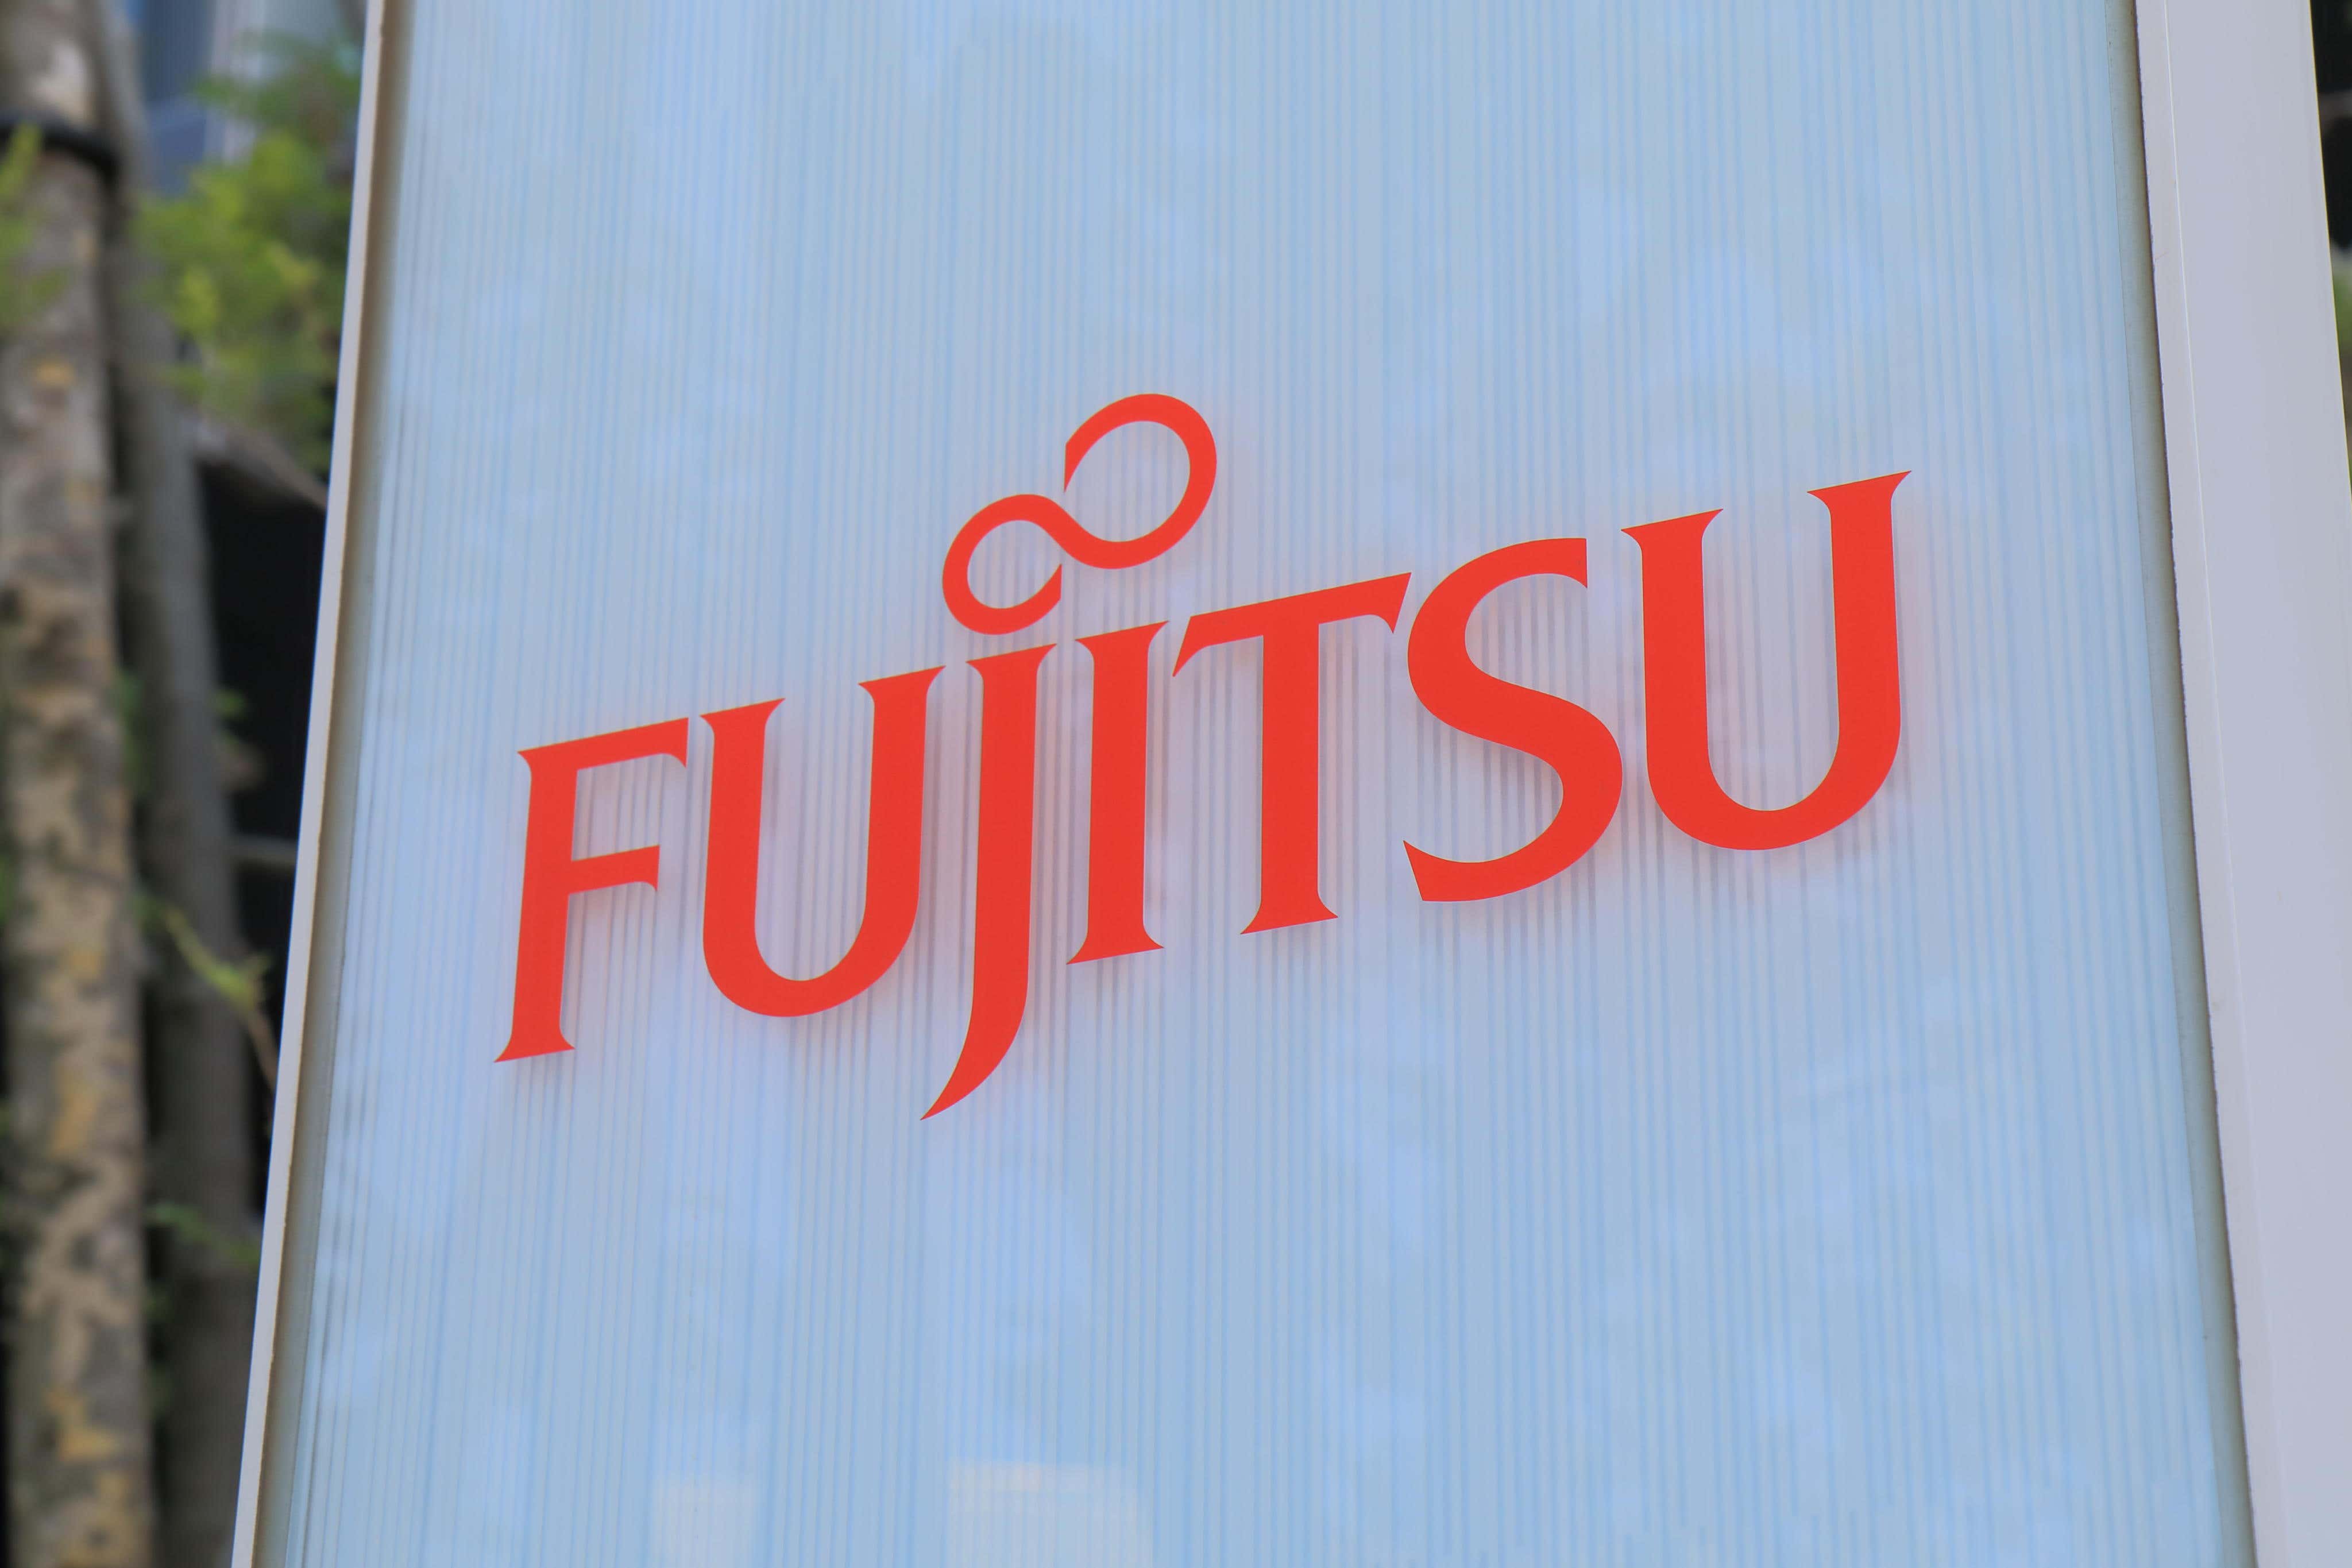 Japanese company Fujitsu made the Horizon software at the centre of the Post Office IT scandal (Alamy/PA)